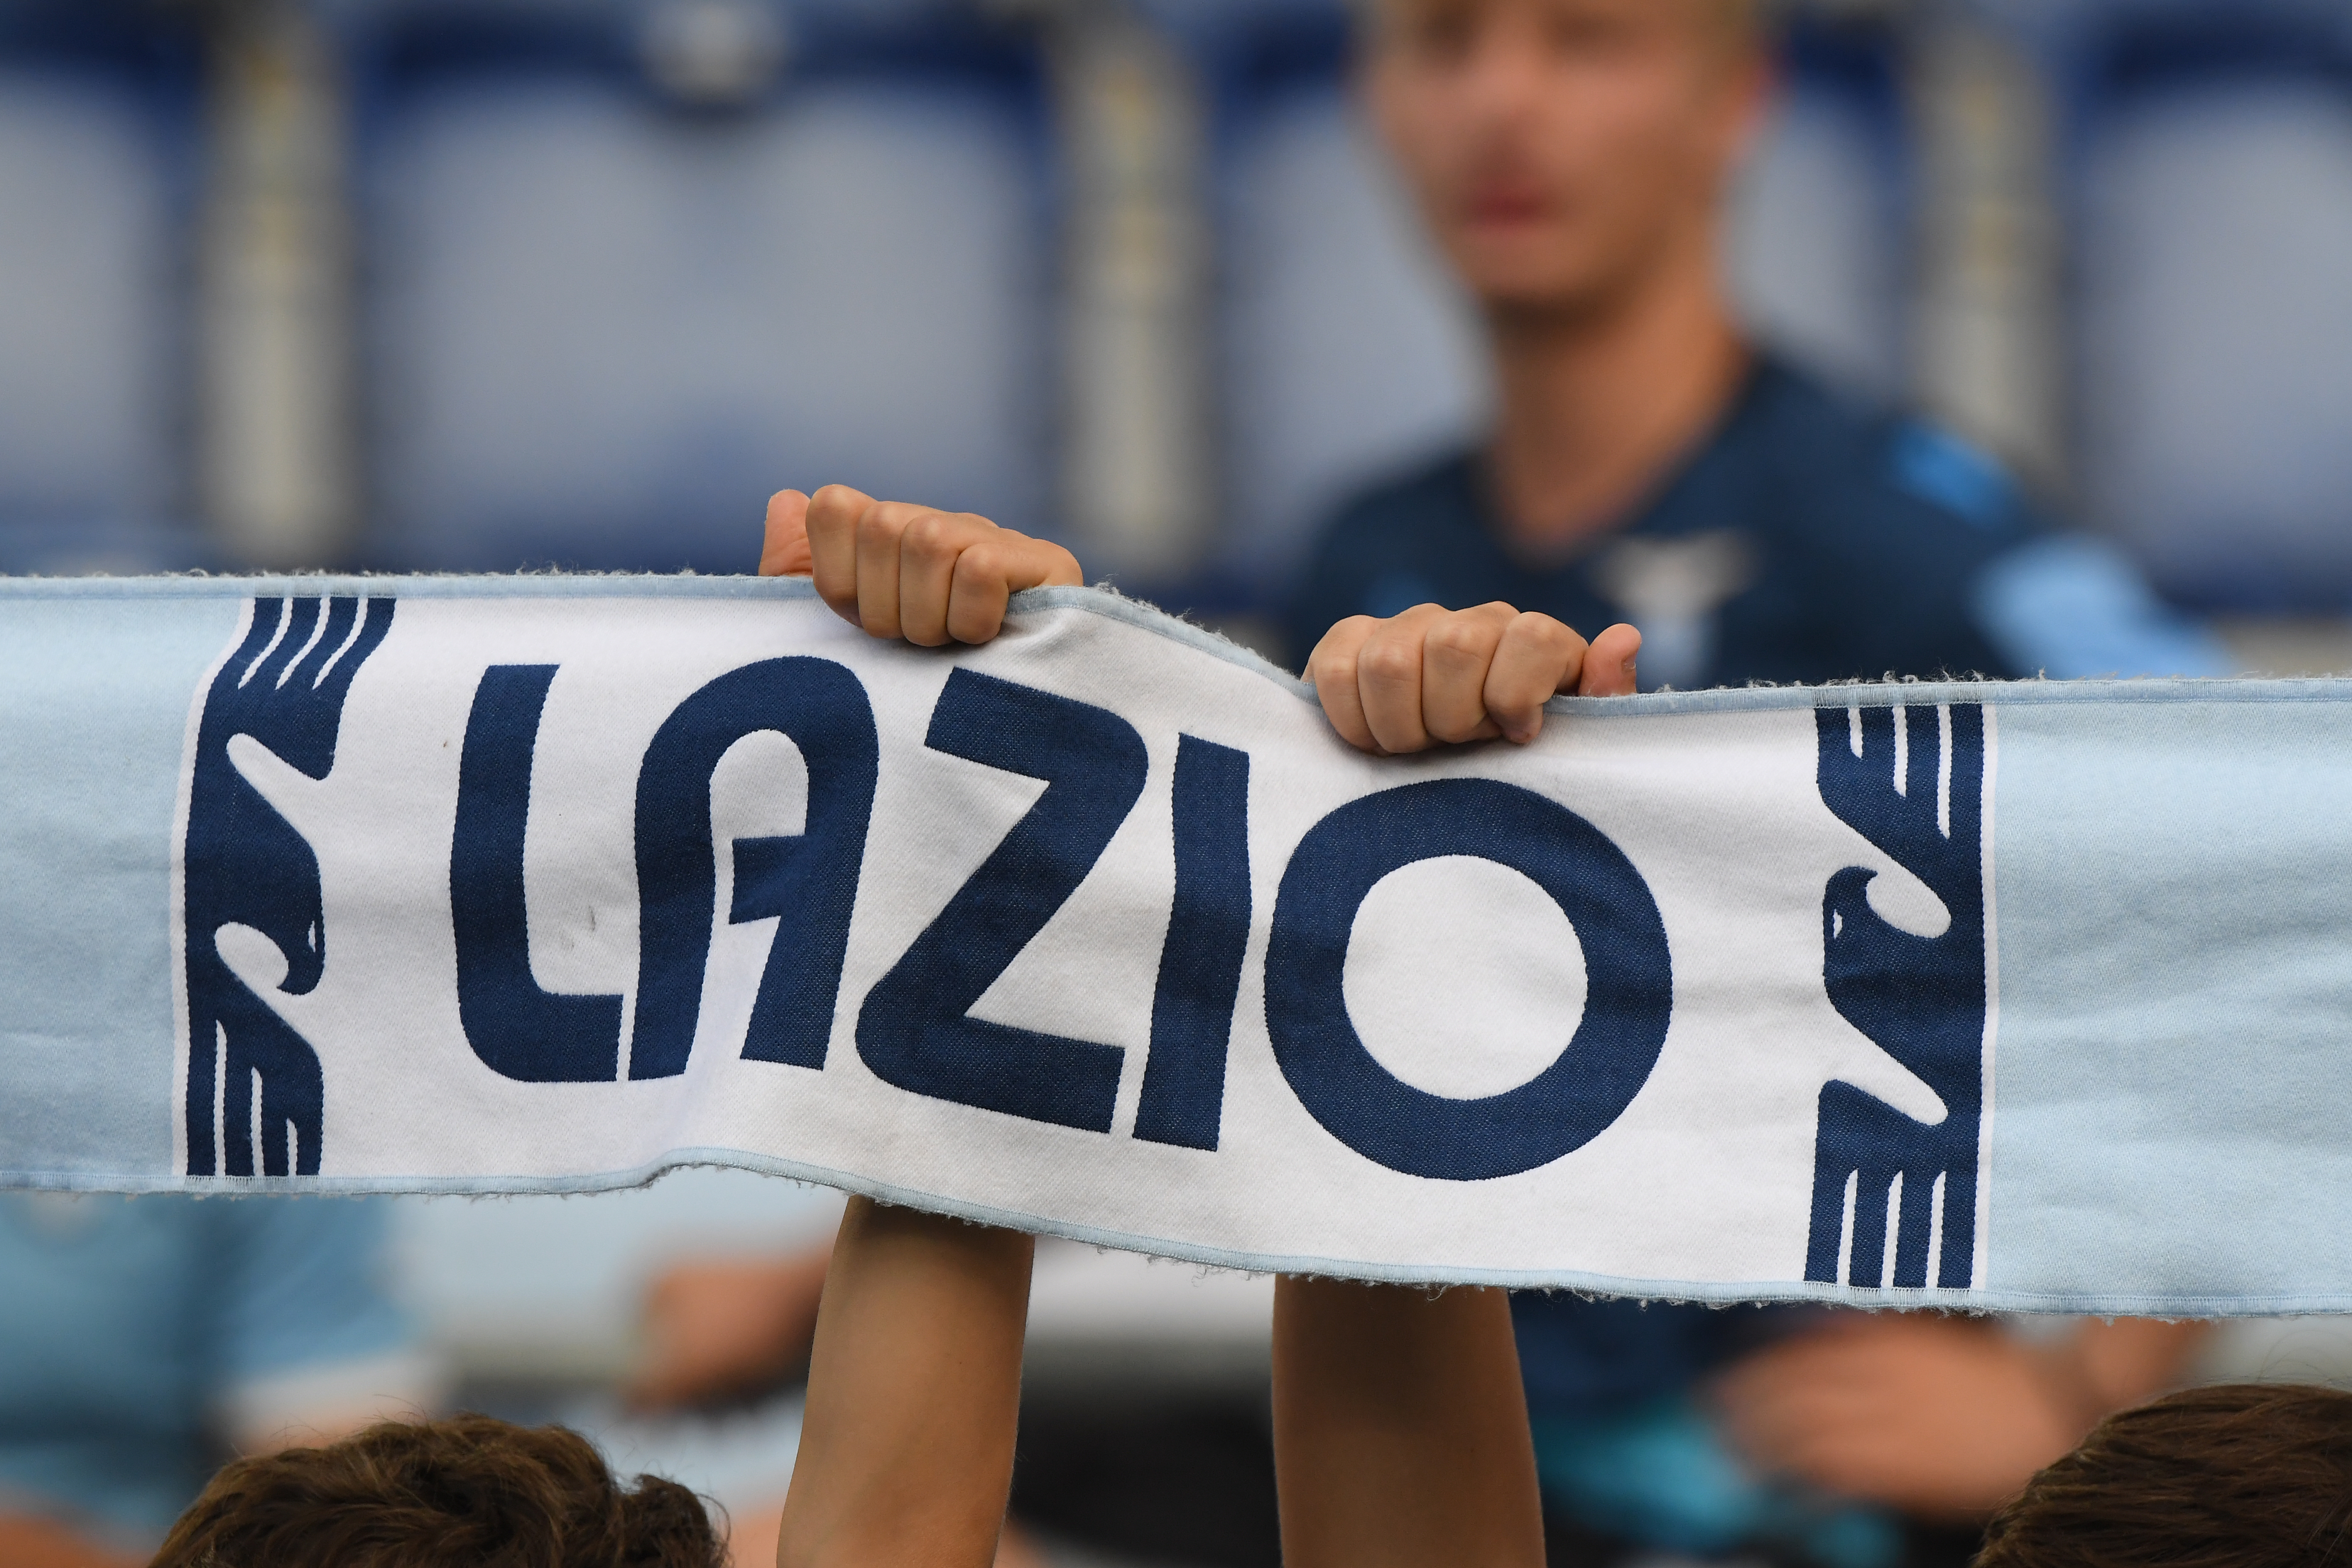 Soccer Football - Serie A - Lazio v Cagliari - Stadio Olimpico, Rome, Italy - September 19, 2021 General view of Lazio fans holding a scarf inside the stadium before the match REUTERS/Alberto Lingria